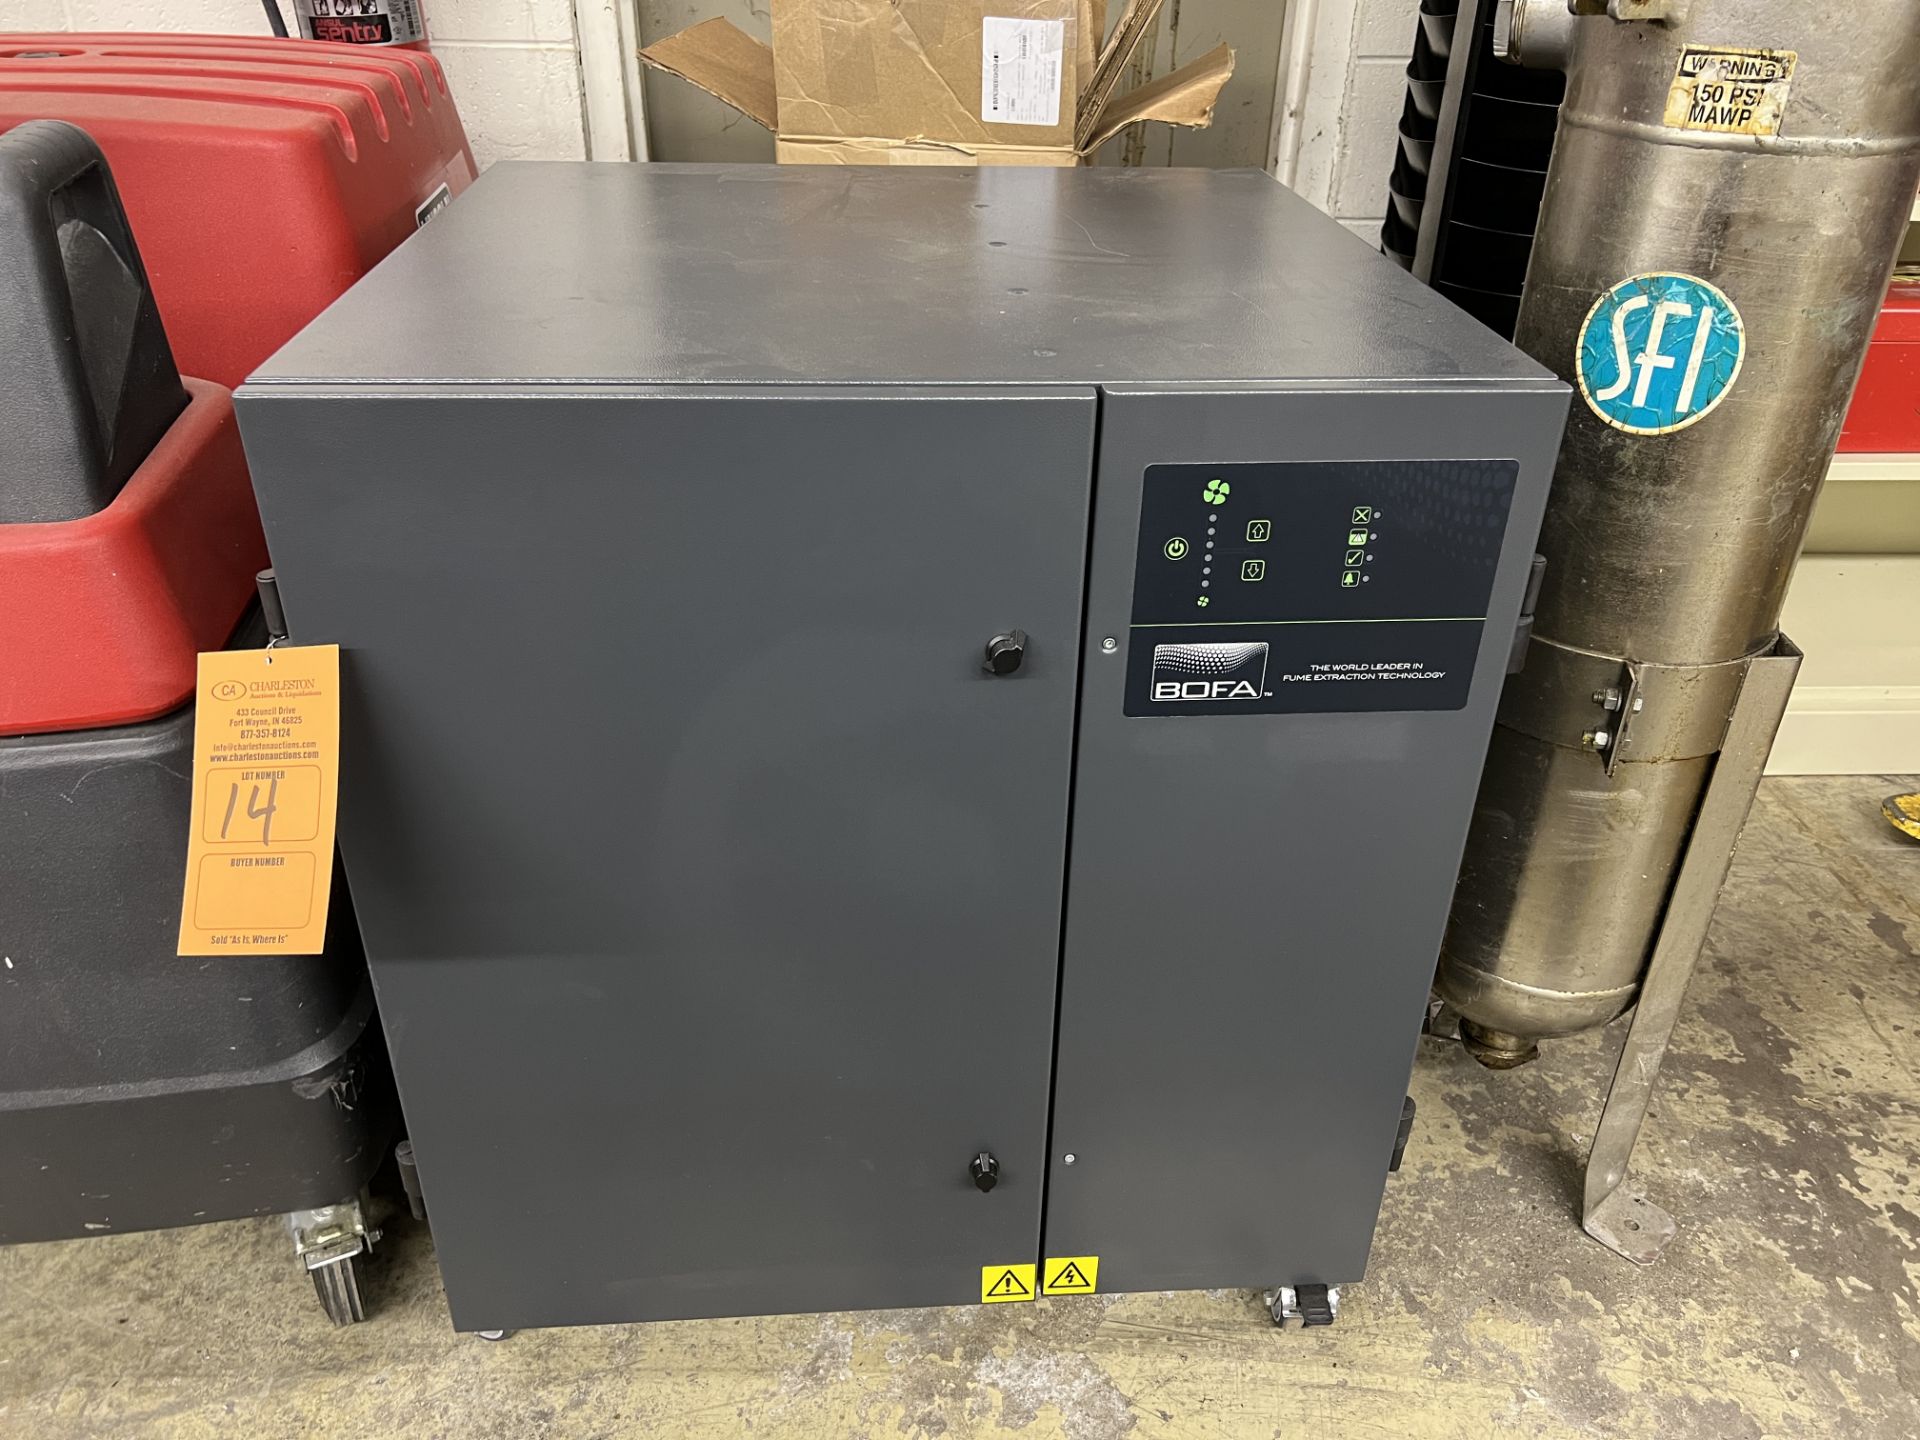 2021 BOFA FUME EXTRACTOR MODEL # AD BASE 1 ORACLE; SERIAL # 50153108002; 115-230V; 50/60HZ; 12.5A